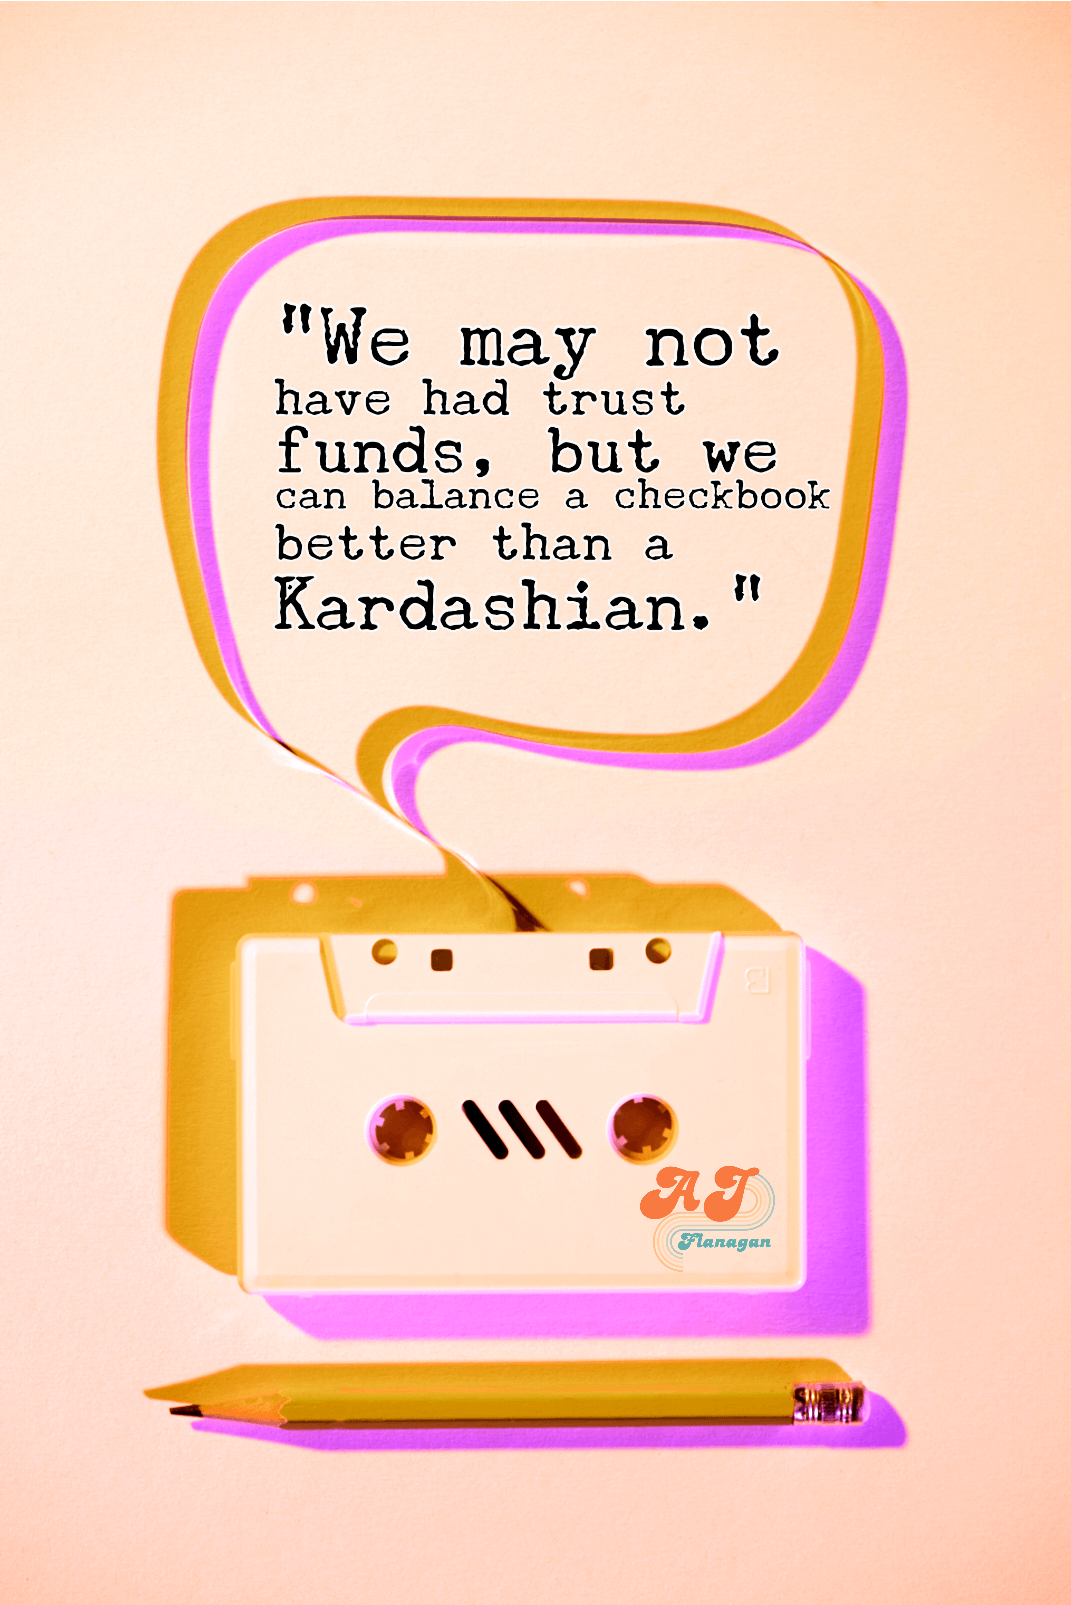 "We may not have had trust funds, but we can balance a checkbook better than a Kardashian."